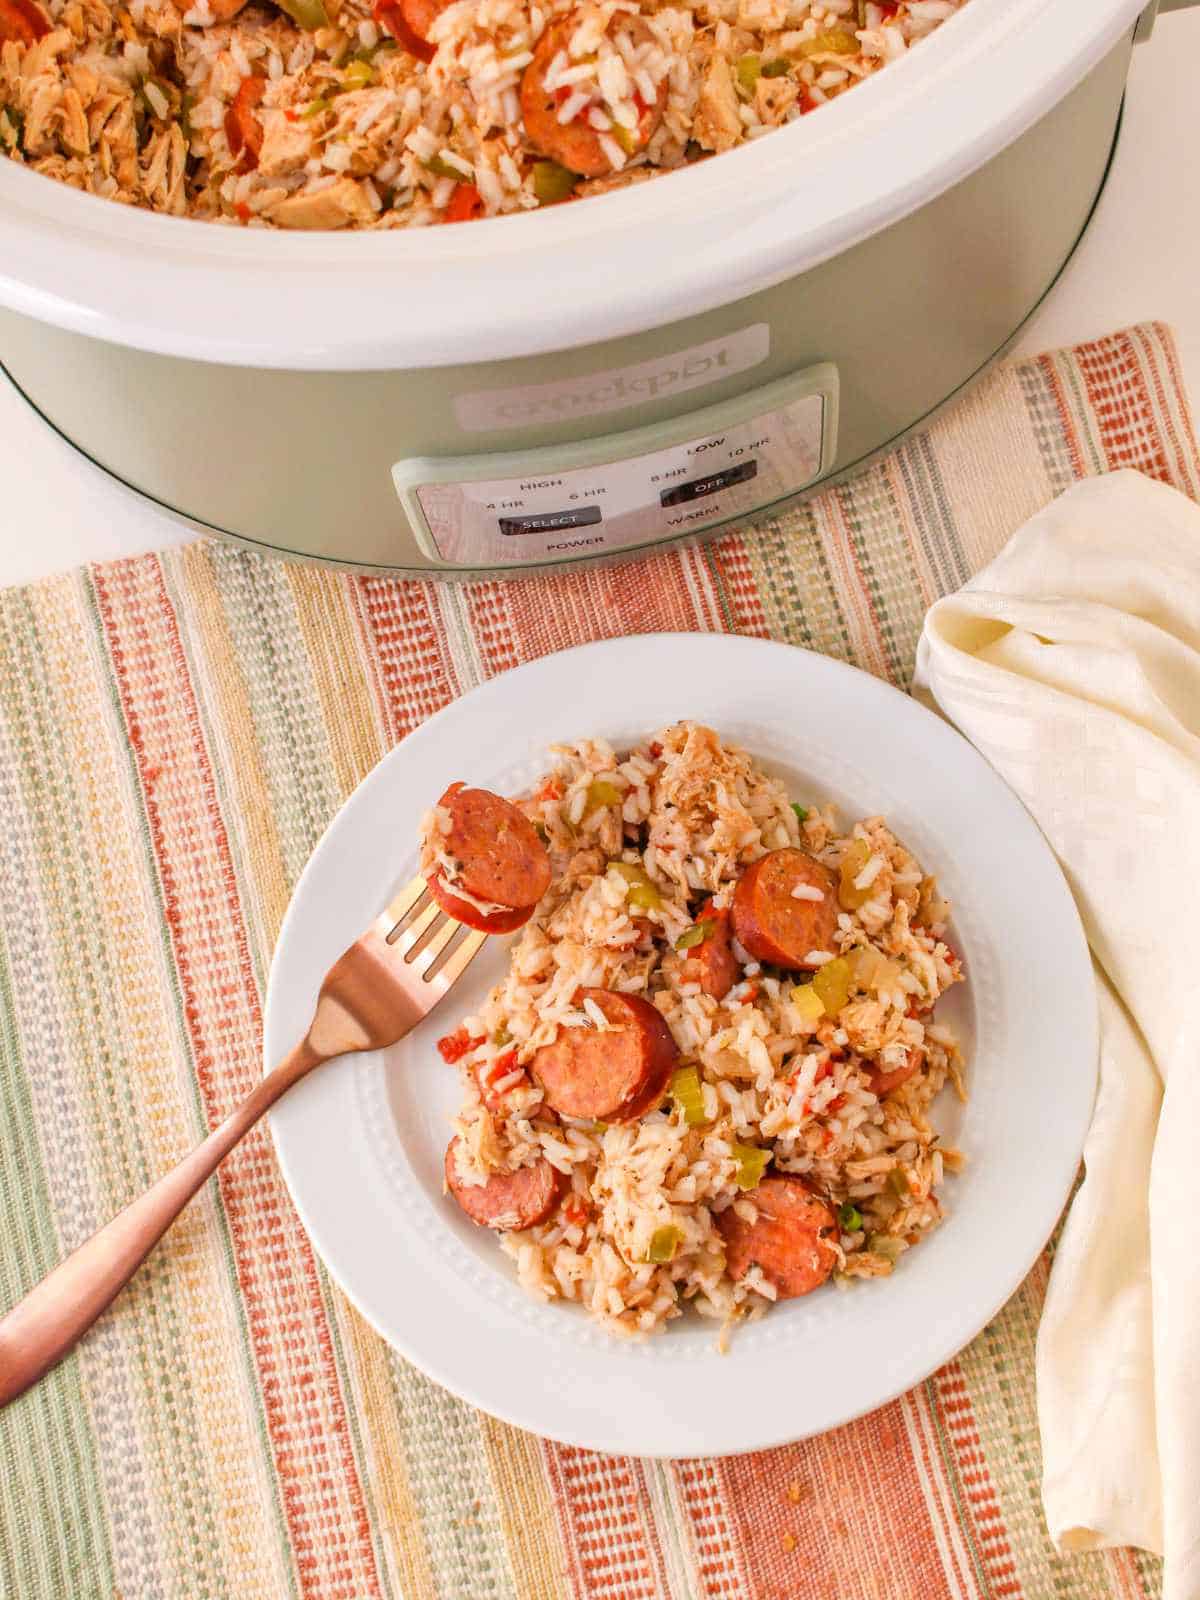 slow cooker with jambalaya, with a serving plate nearby.